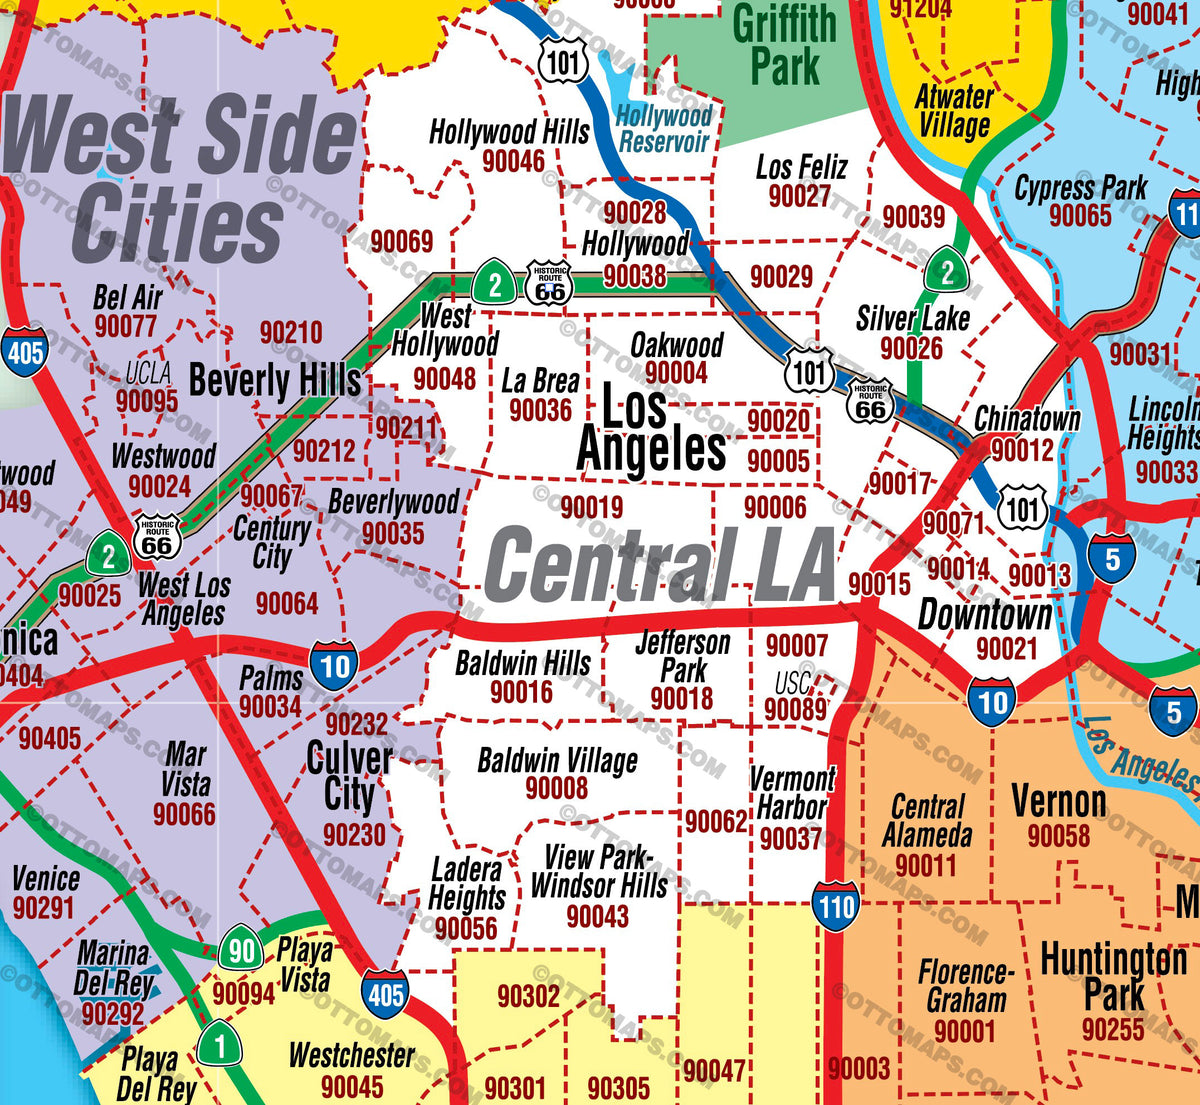 west los angeles zip code map Los Angeles Zip Code Map Full County Areas Colorized Otto Maps west los angeles zip code map